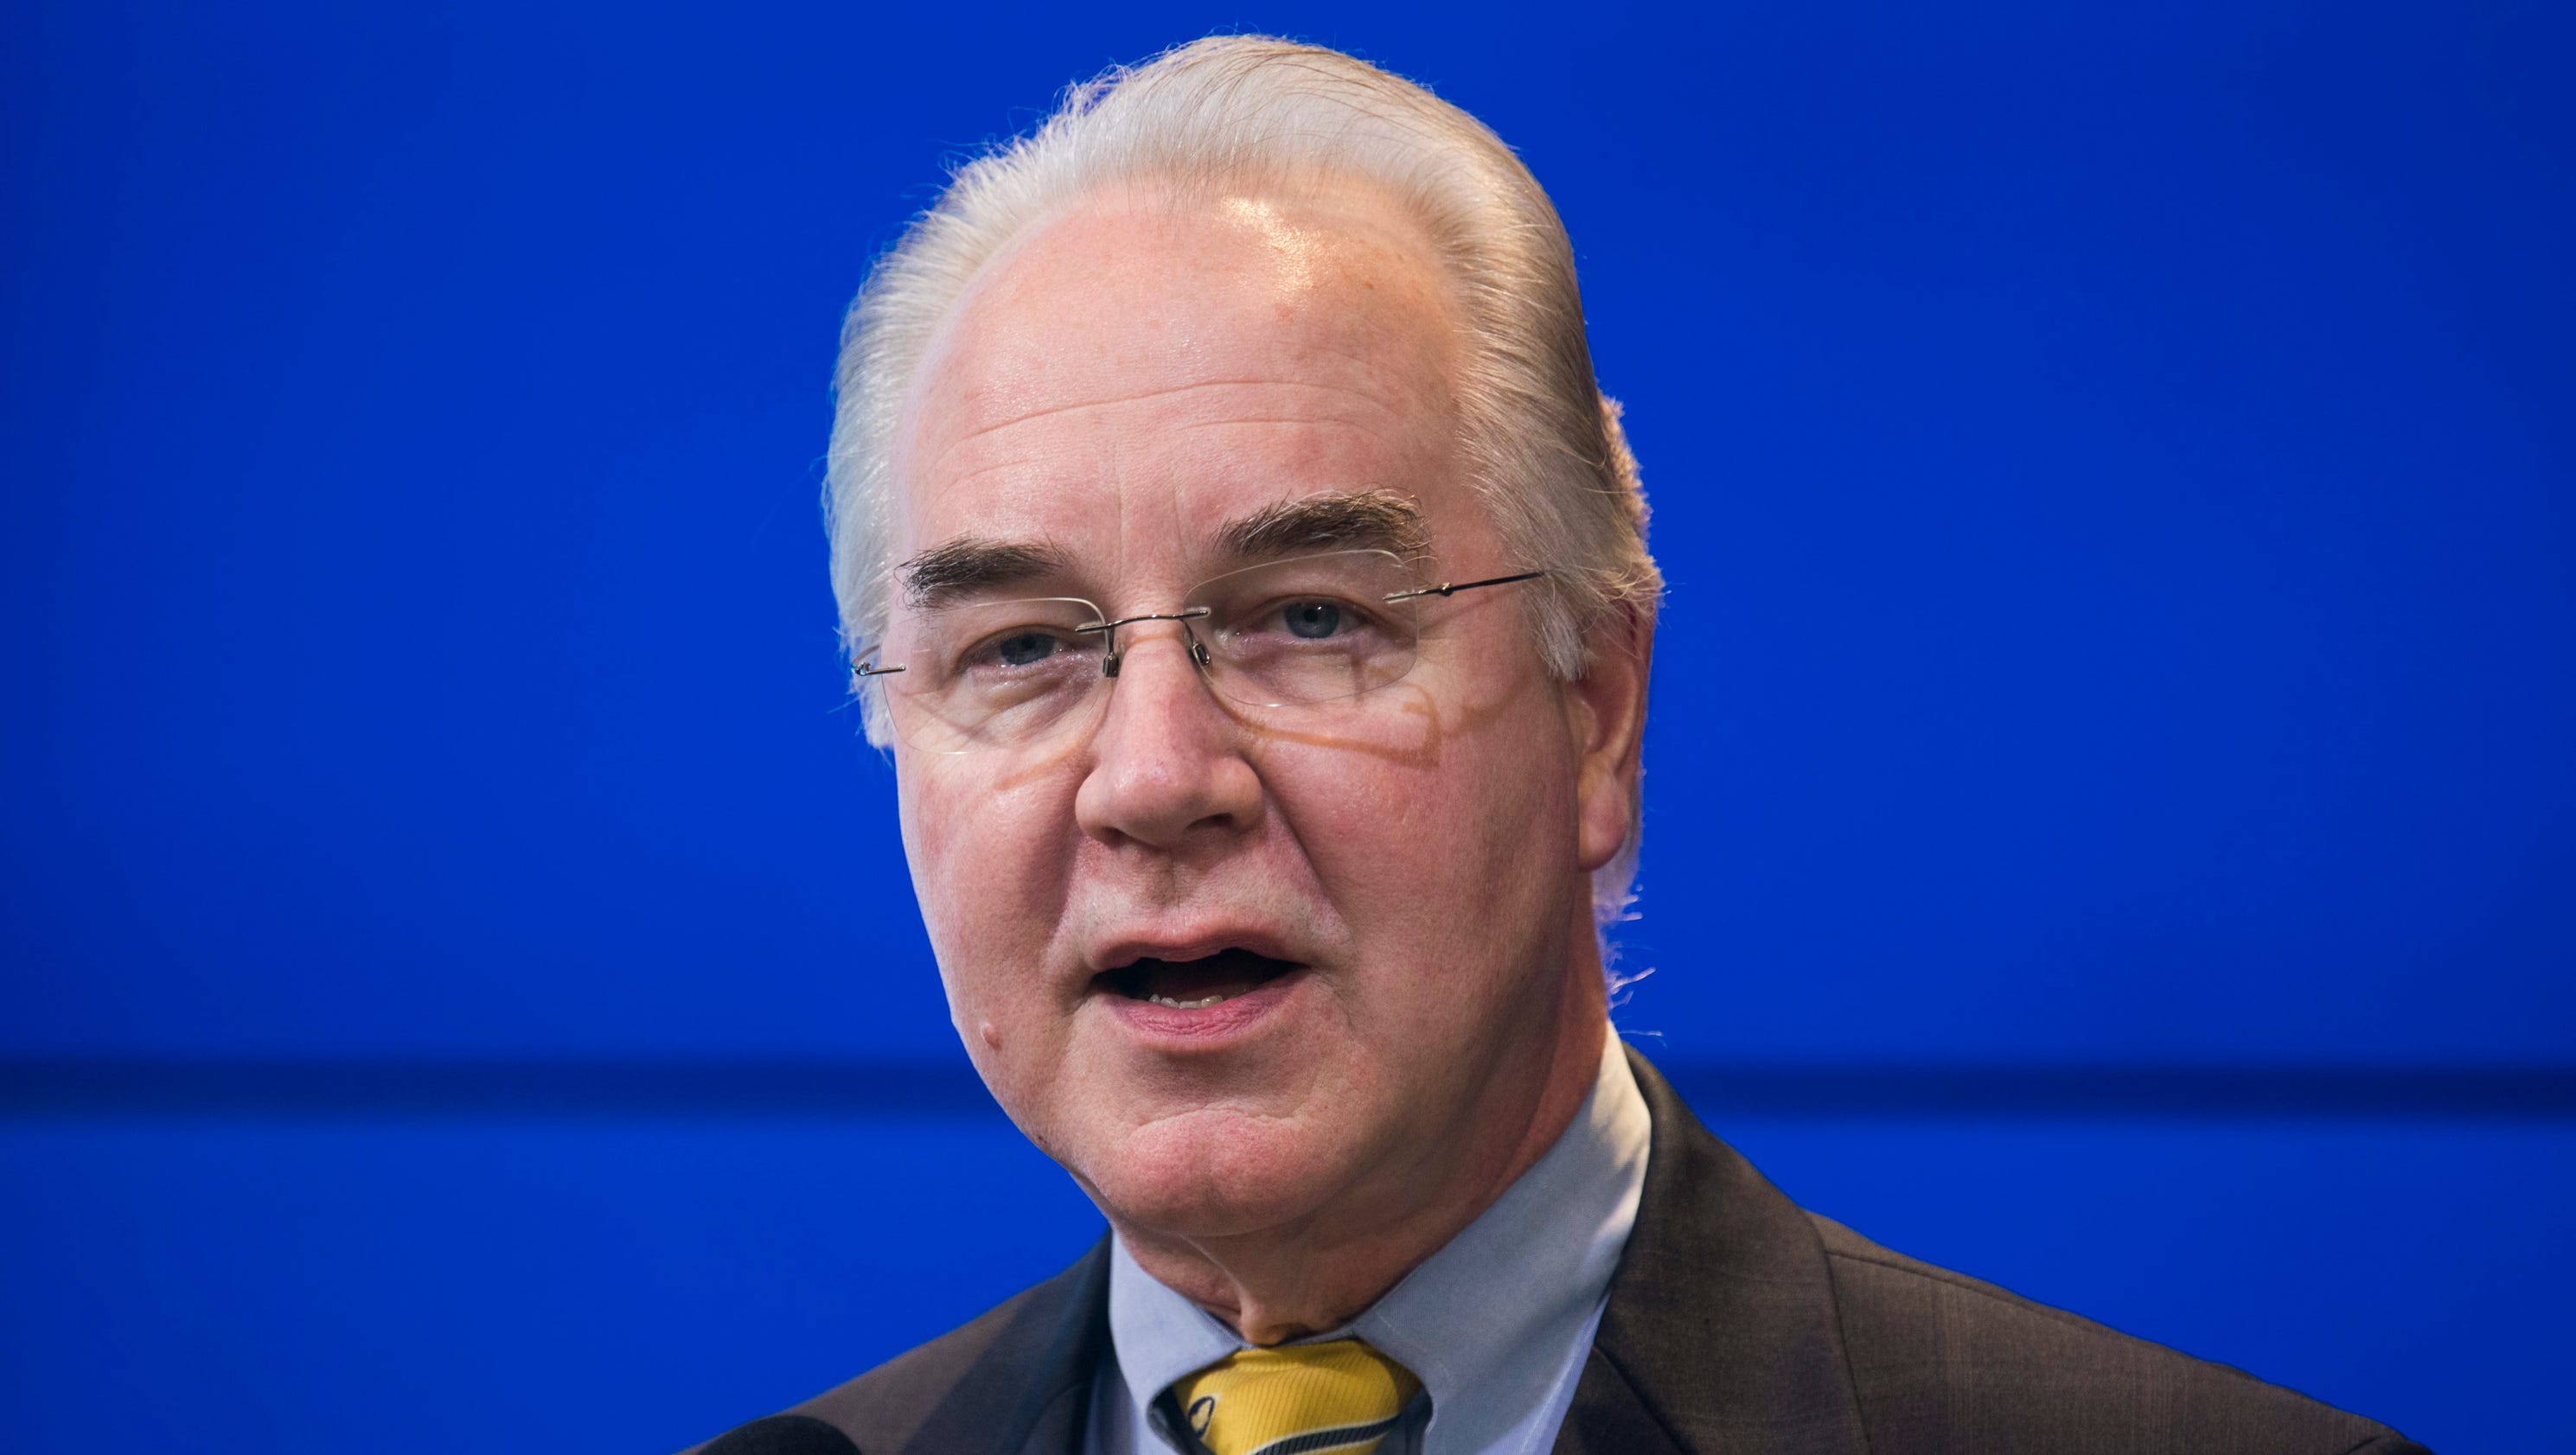 http://www.usatoday.com/story/news/2016/12/08/kaiser-price-poised-protect-doctors-interests-hhs/95122484/